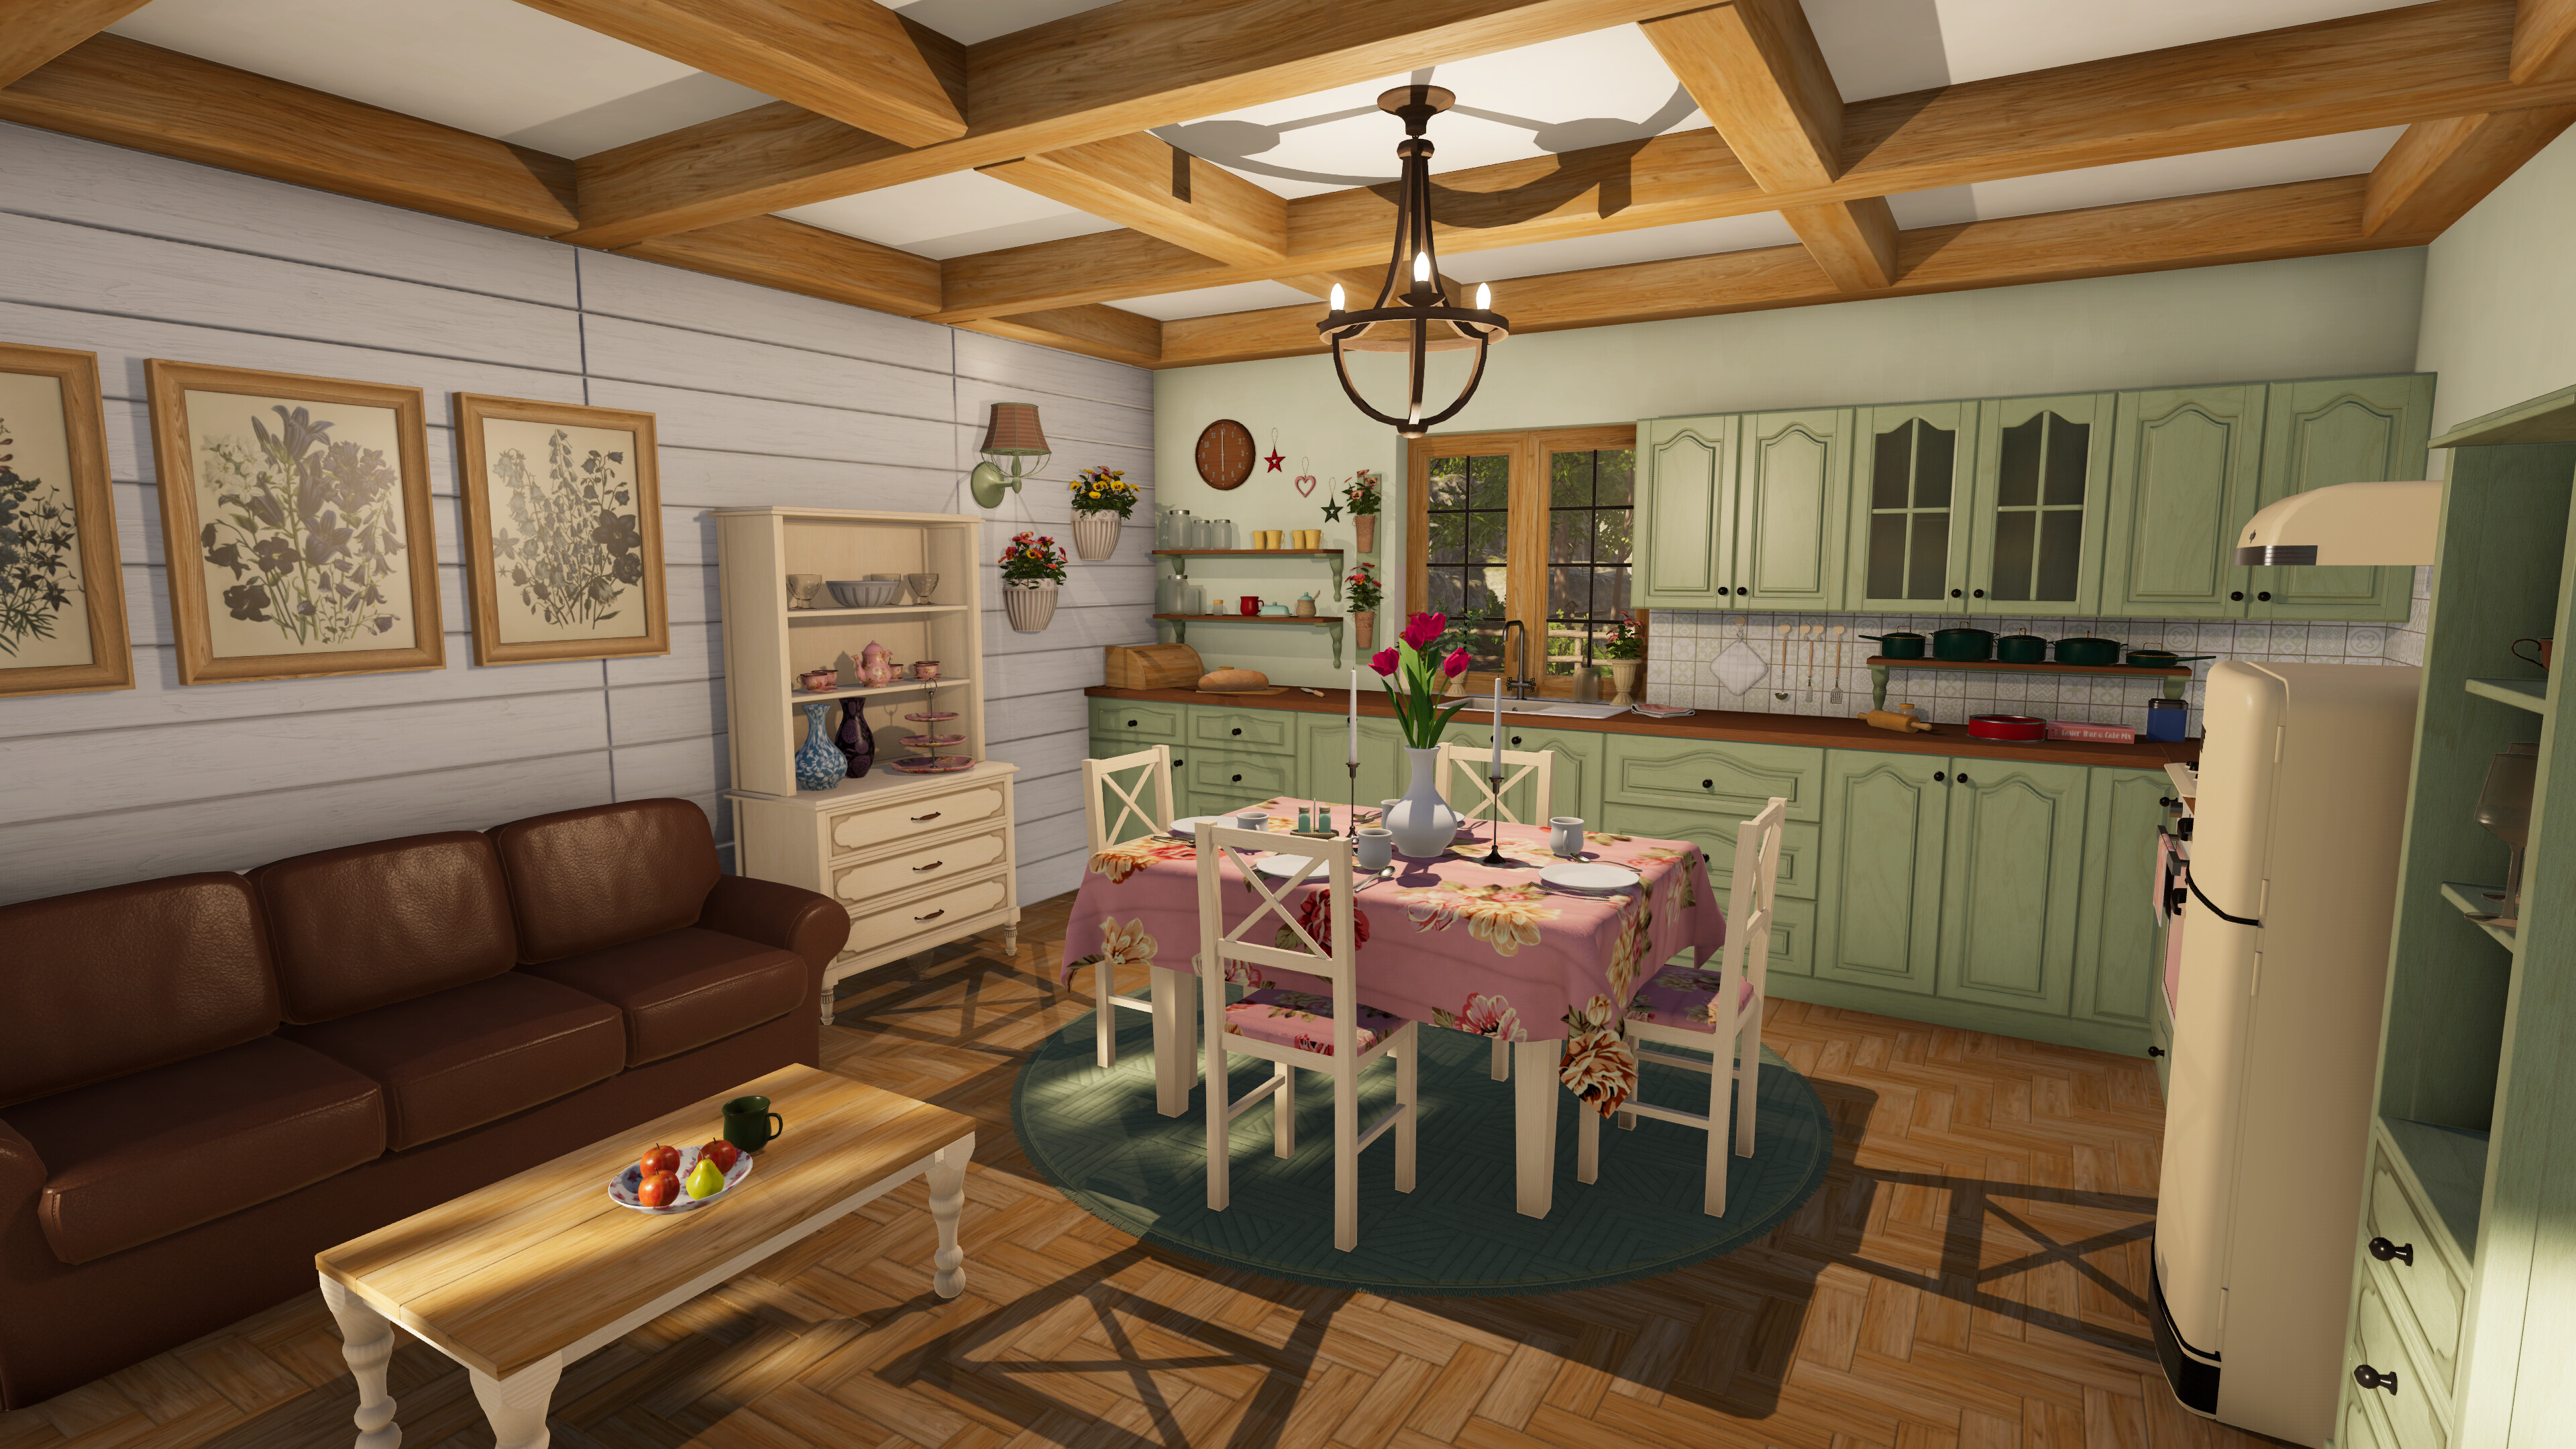 House Flipper 2 Free Download